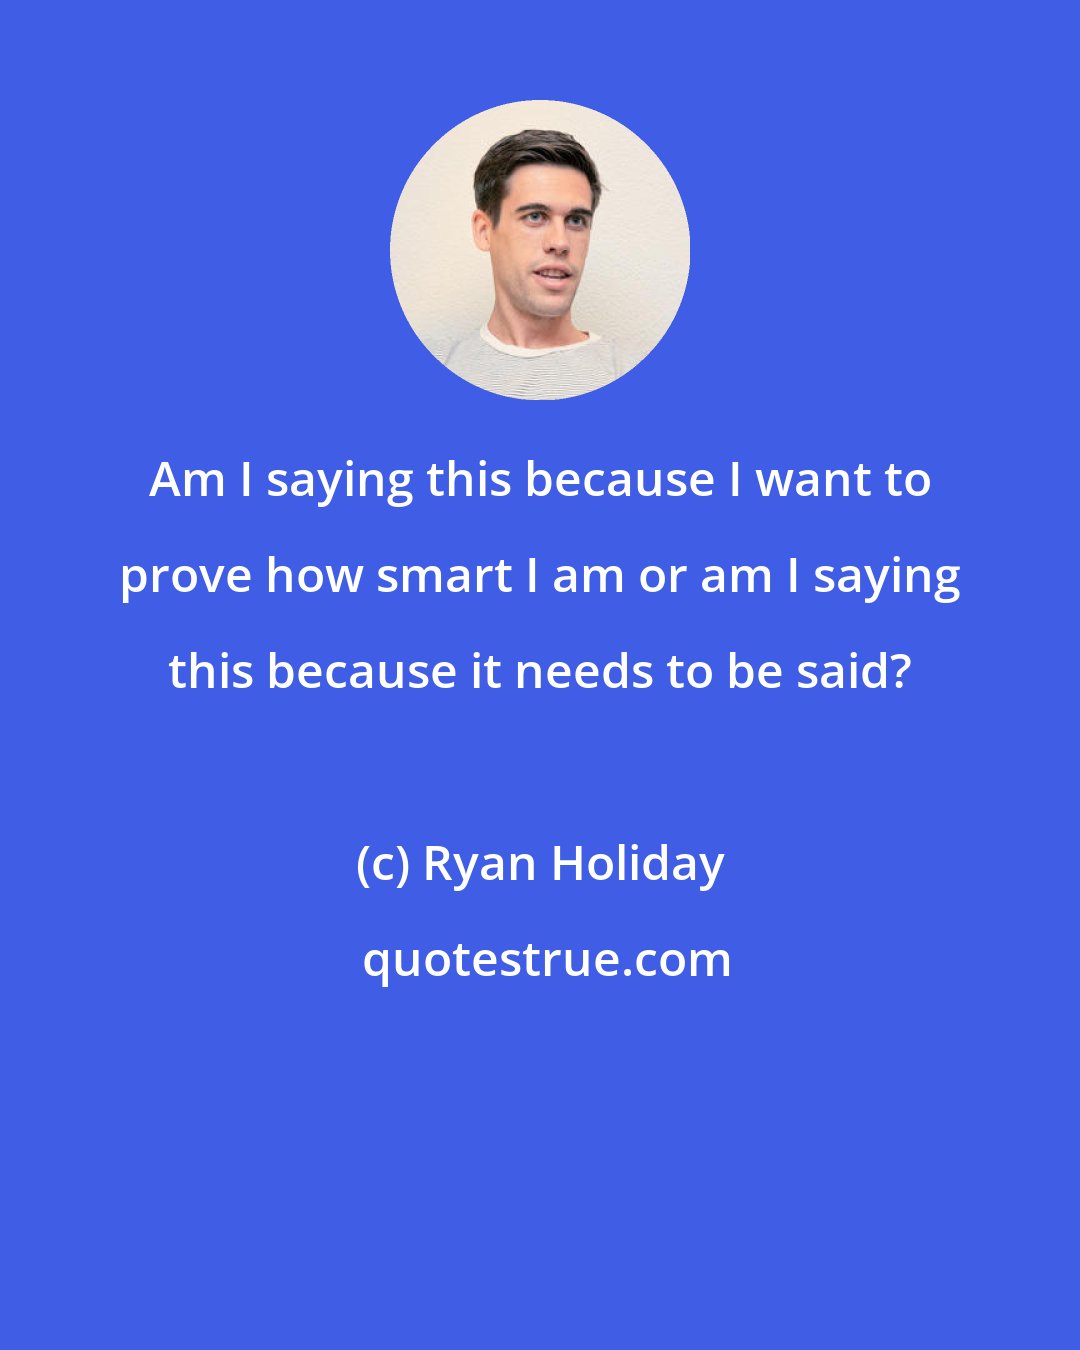 Ryan Holiday: Am I saying this because I want to prove how smart I am or am I saying this because it needs to be said?